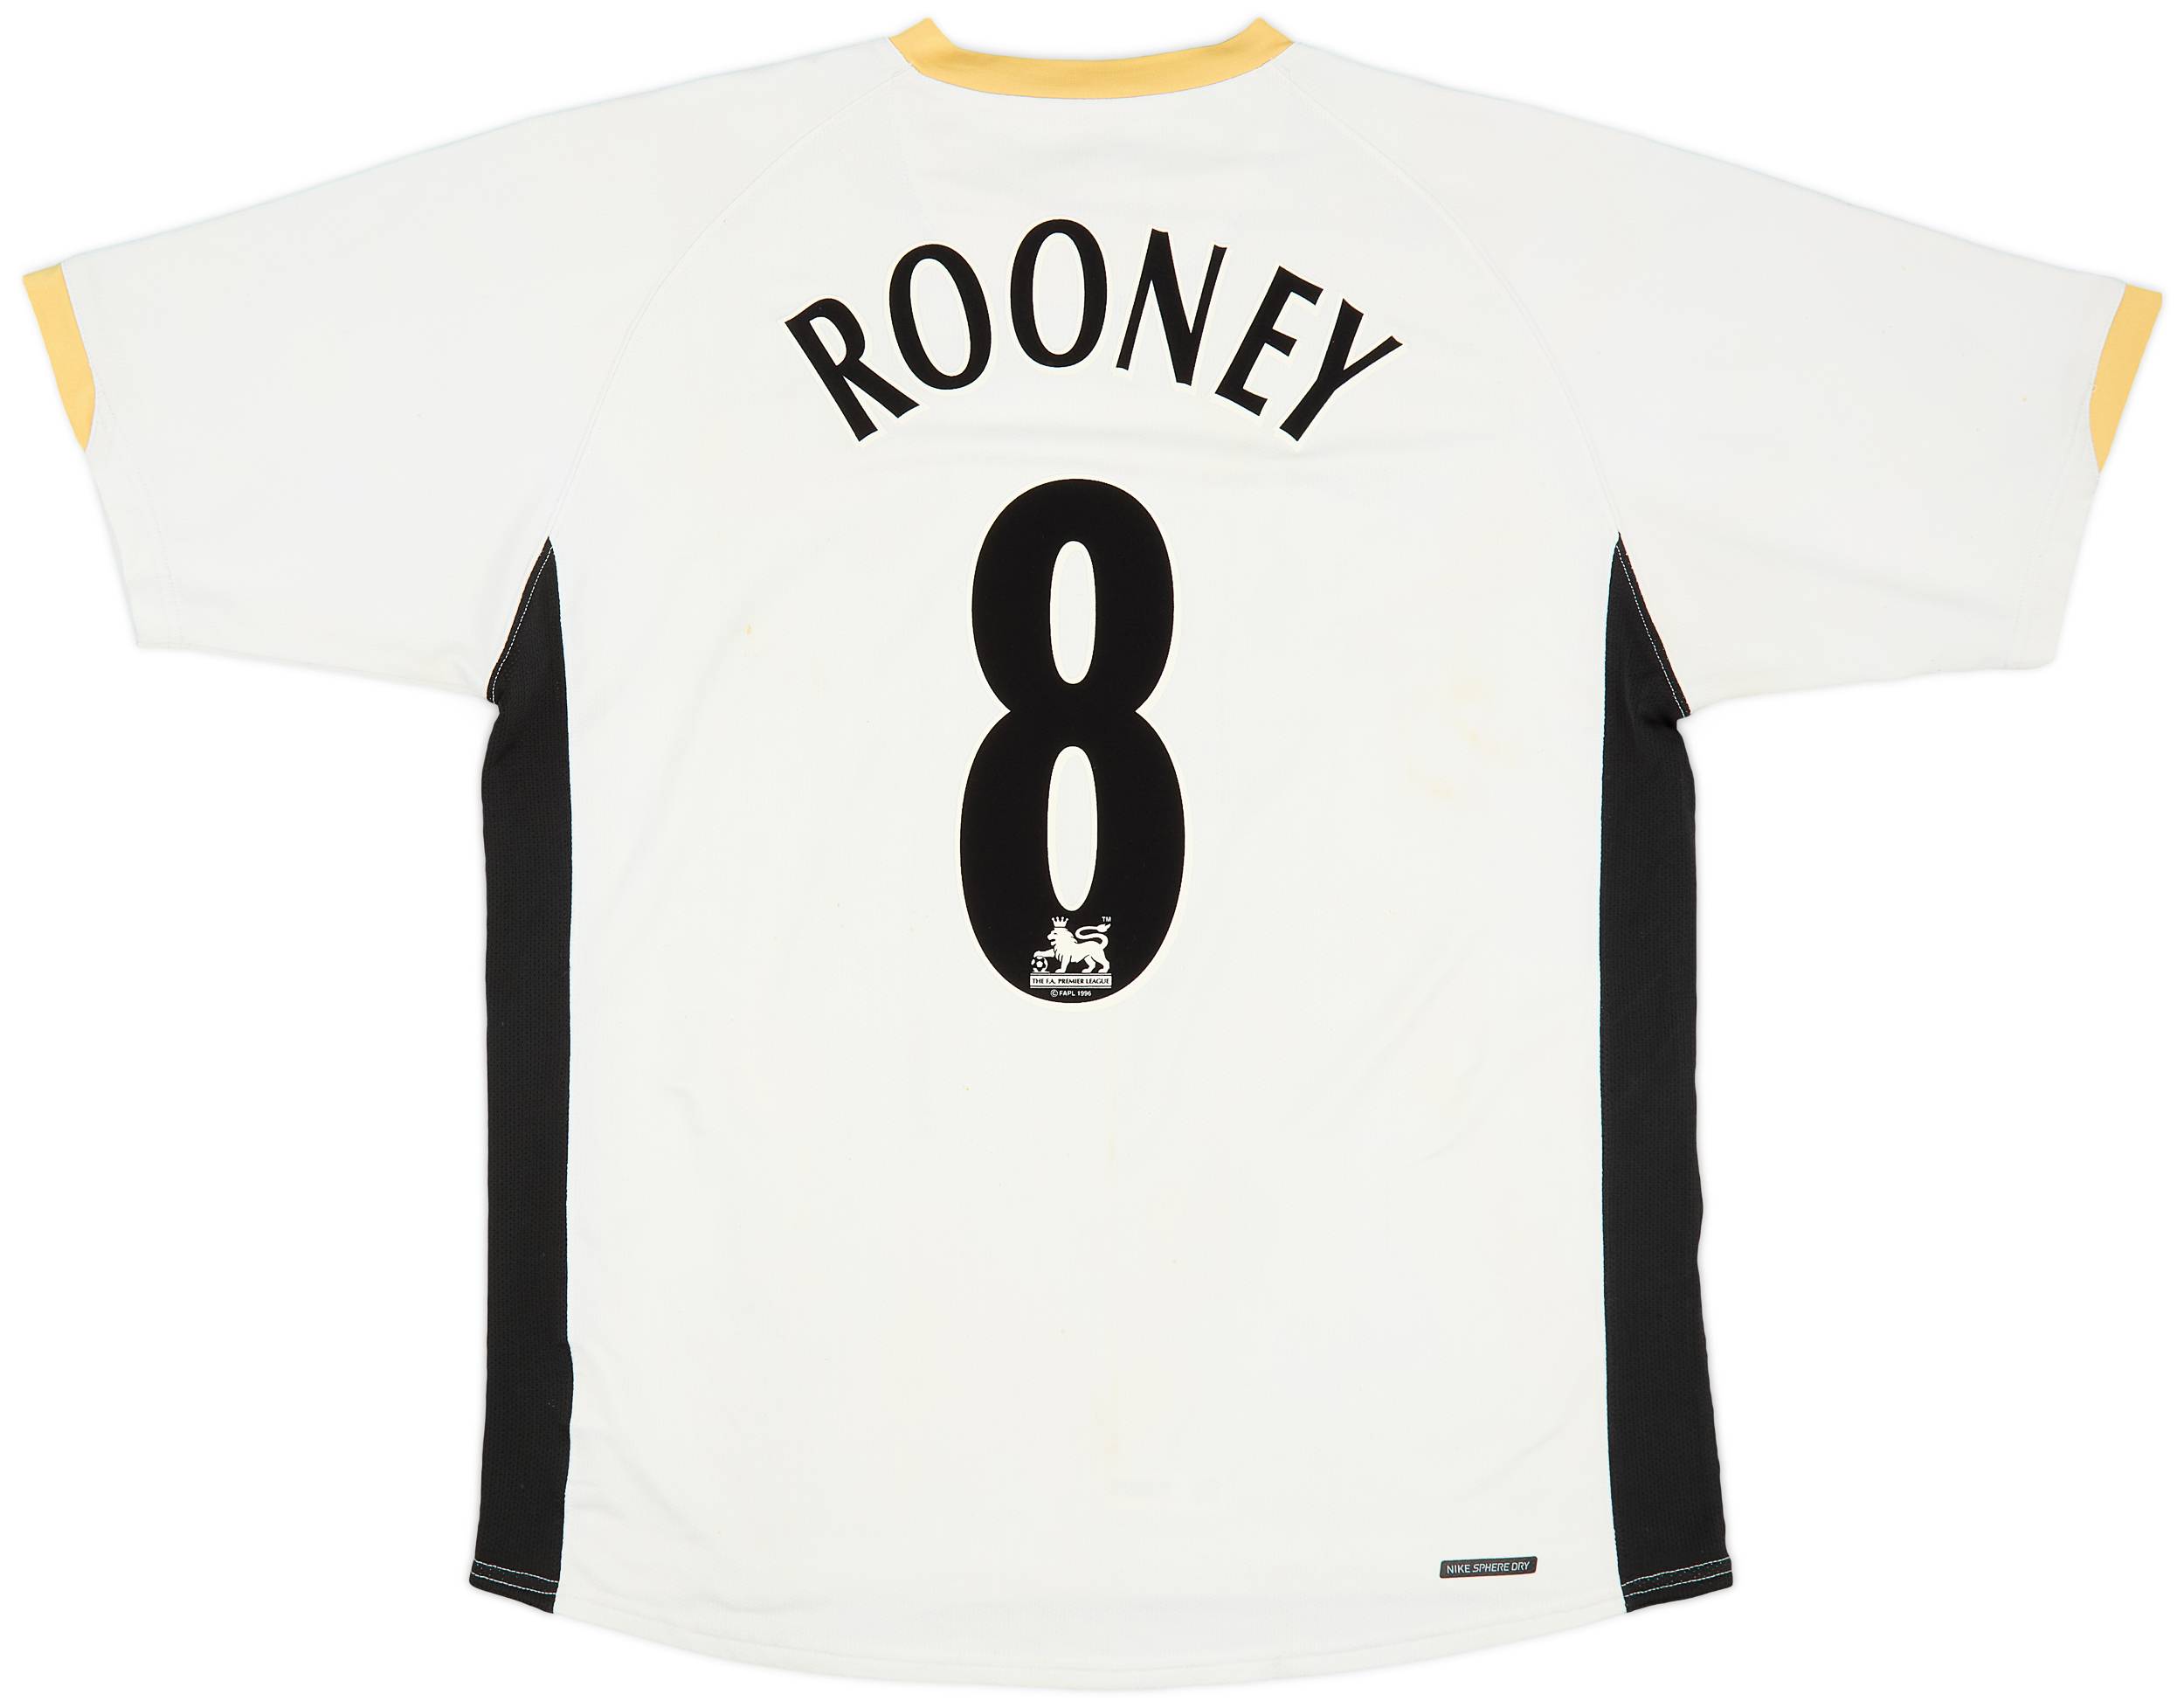 2006-08 Manchester United Away Shirt Rooney #8 - 6/10 - (L)